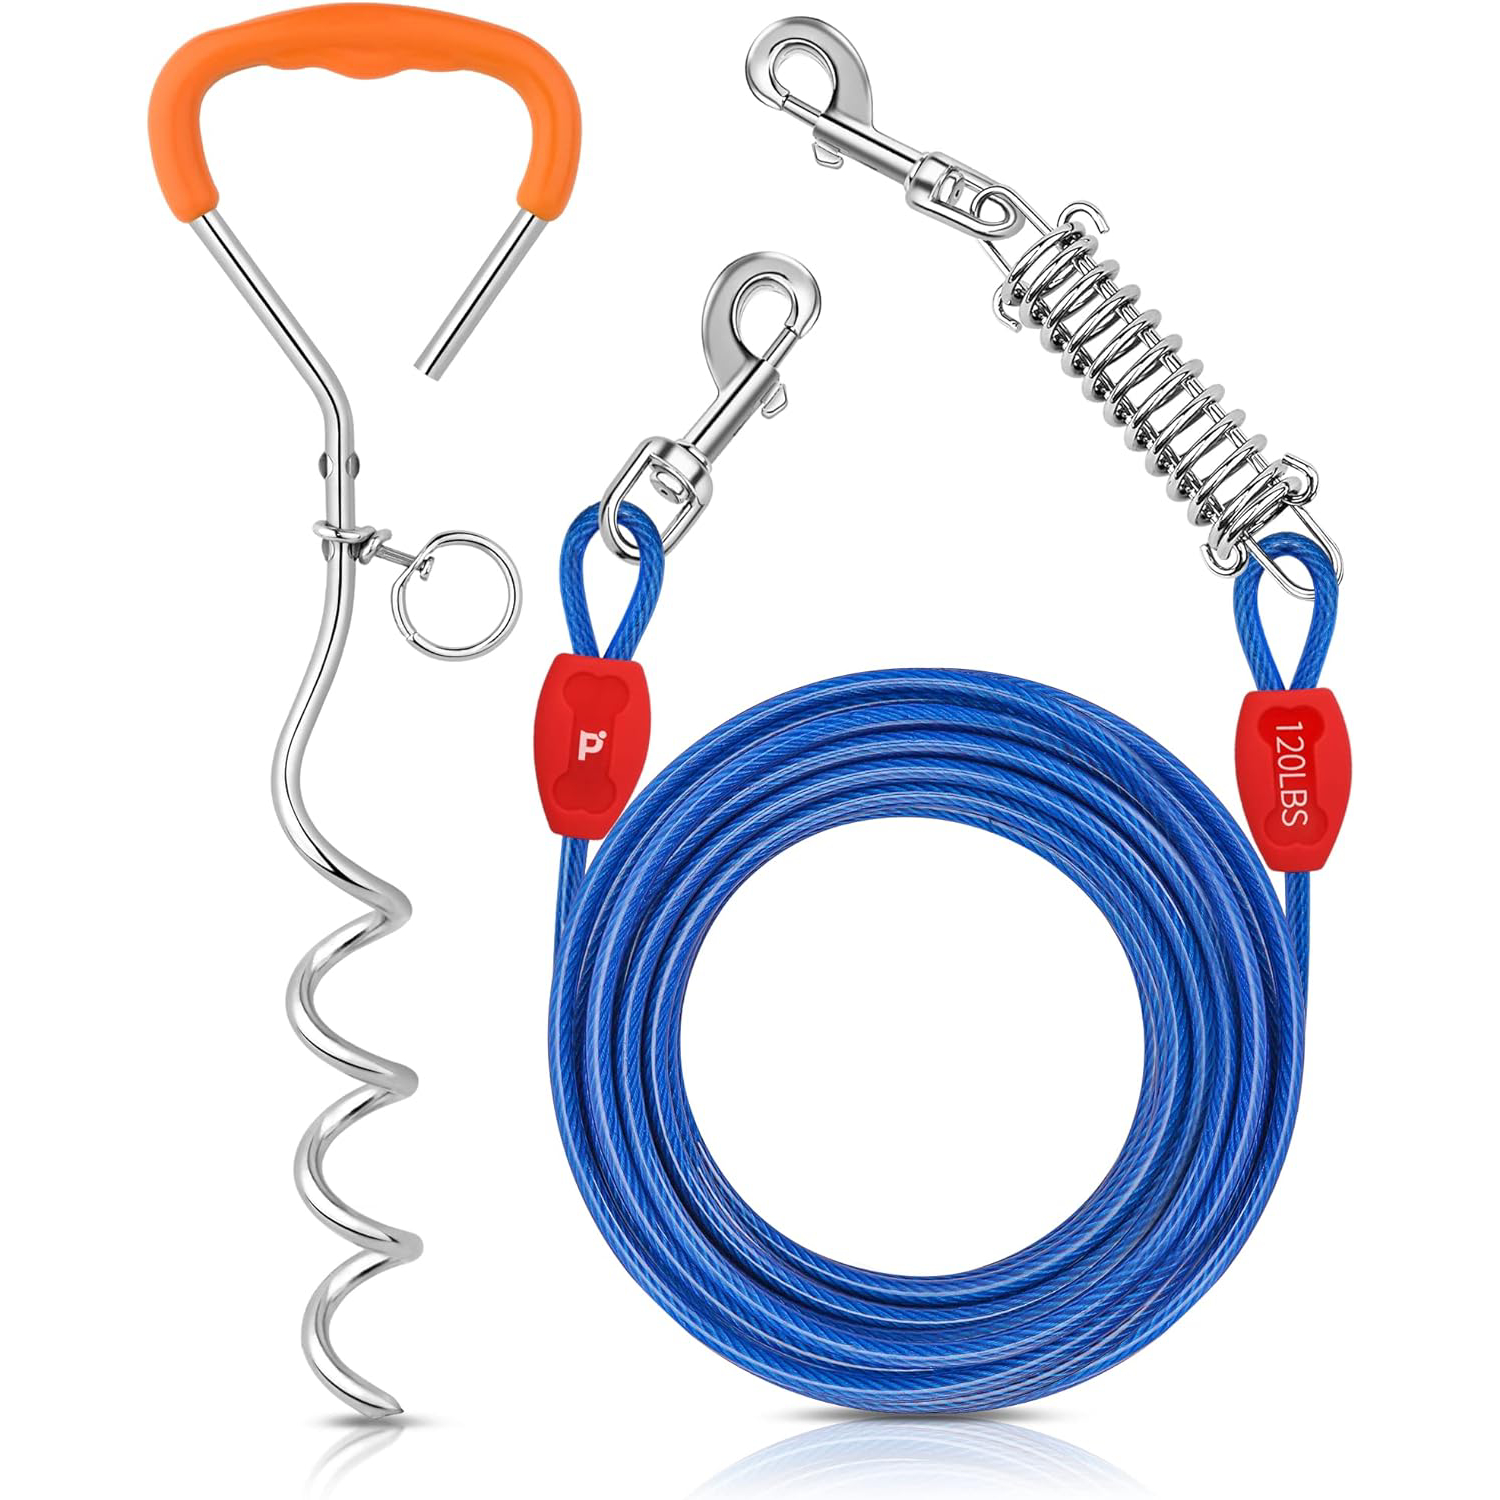 Petbobi Dog Tie Out Cable and Stake 